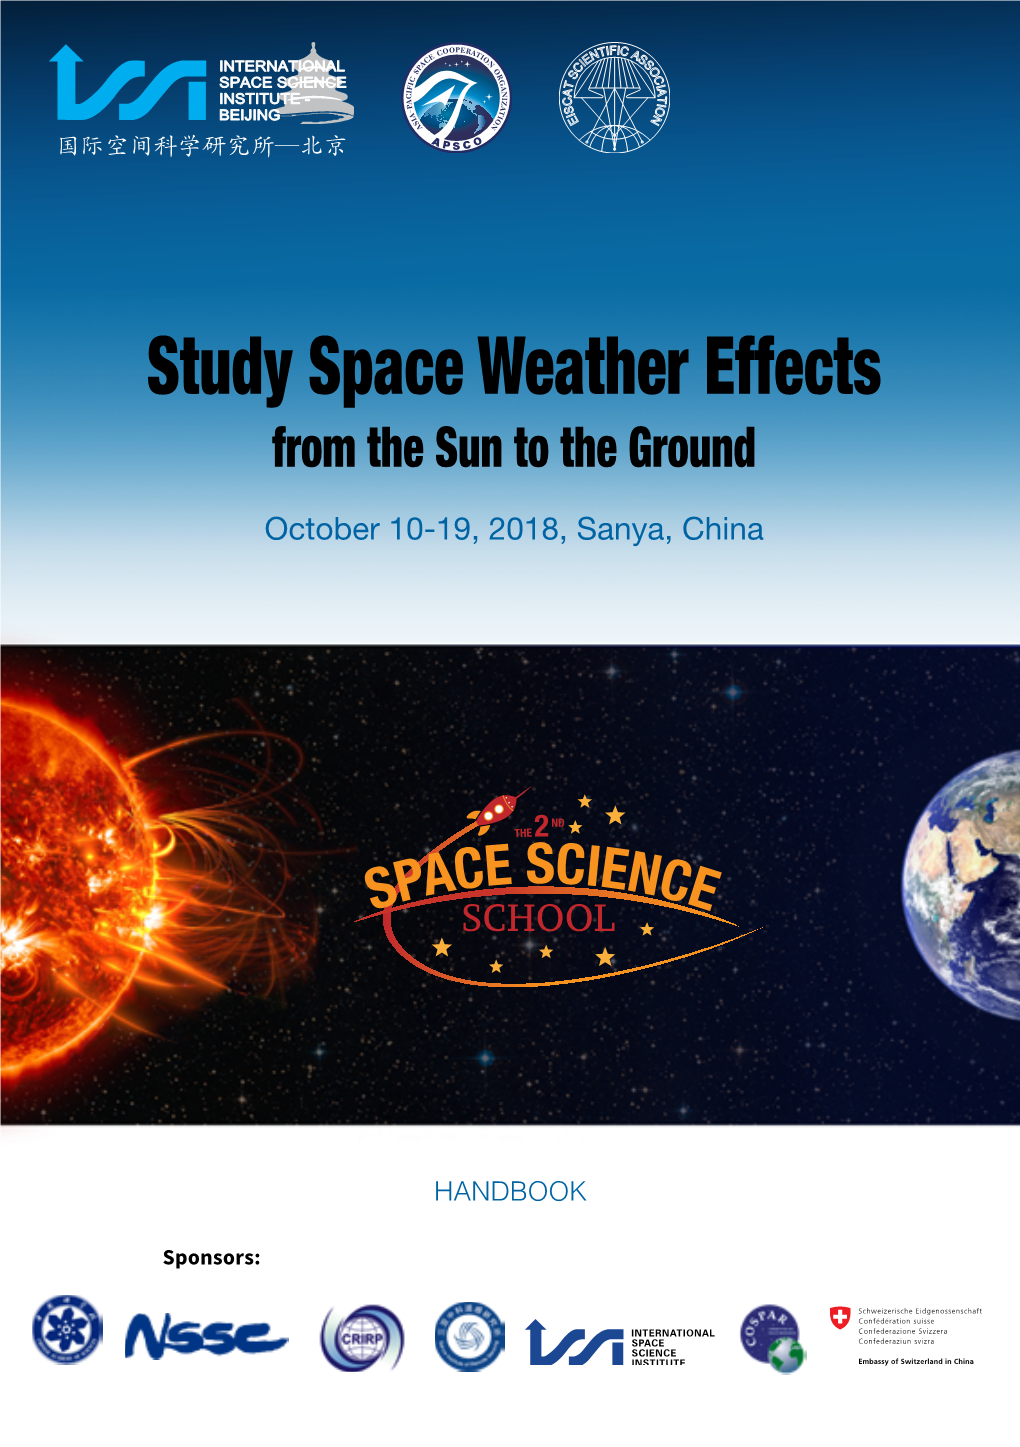 Study Space Weather Effects from the Sun to the Ground